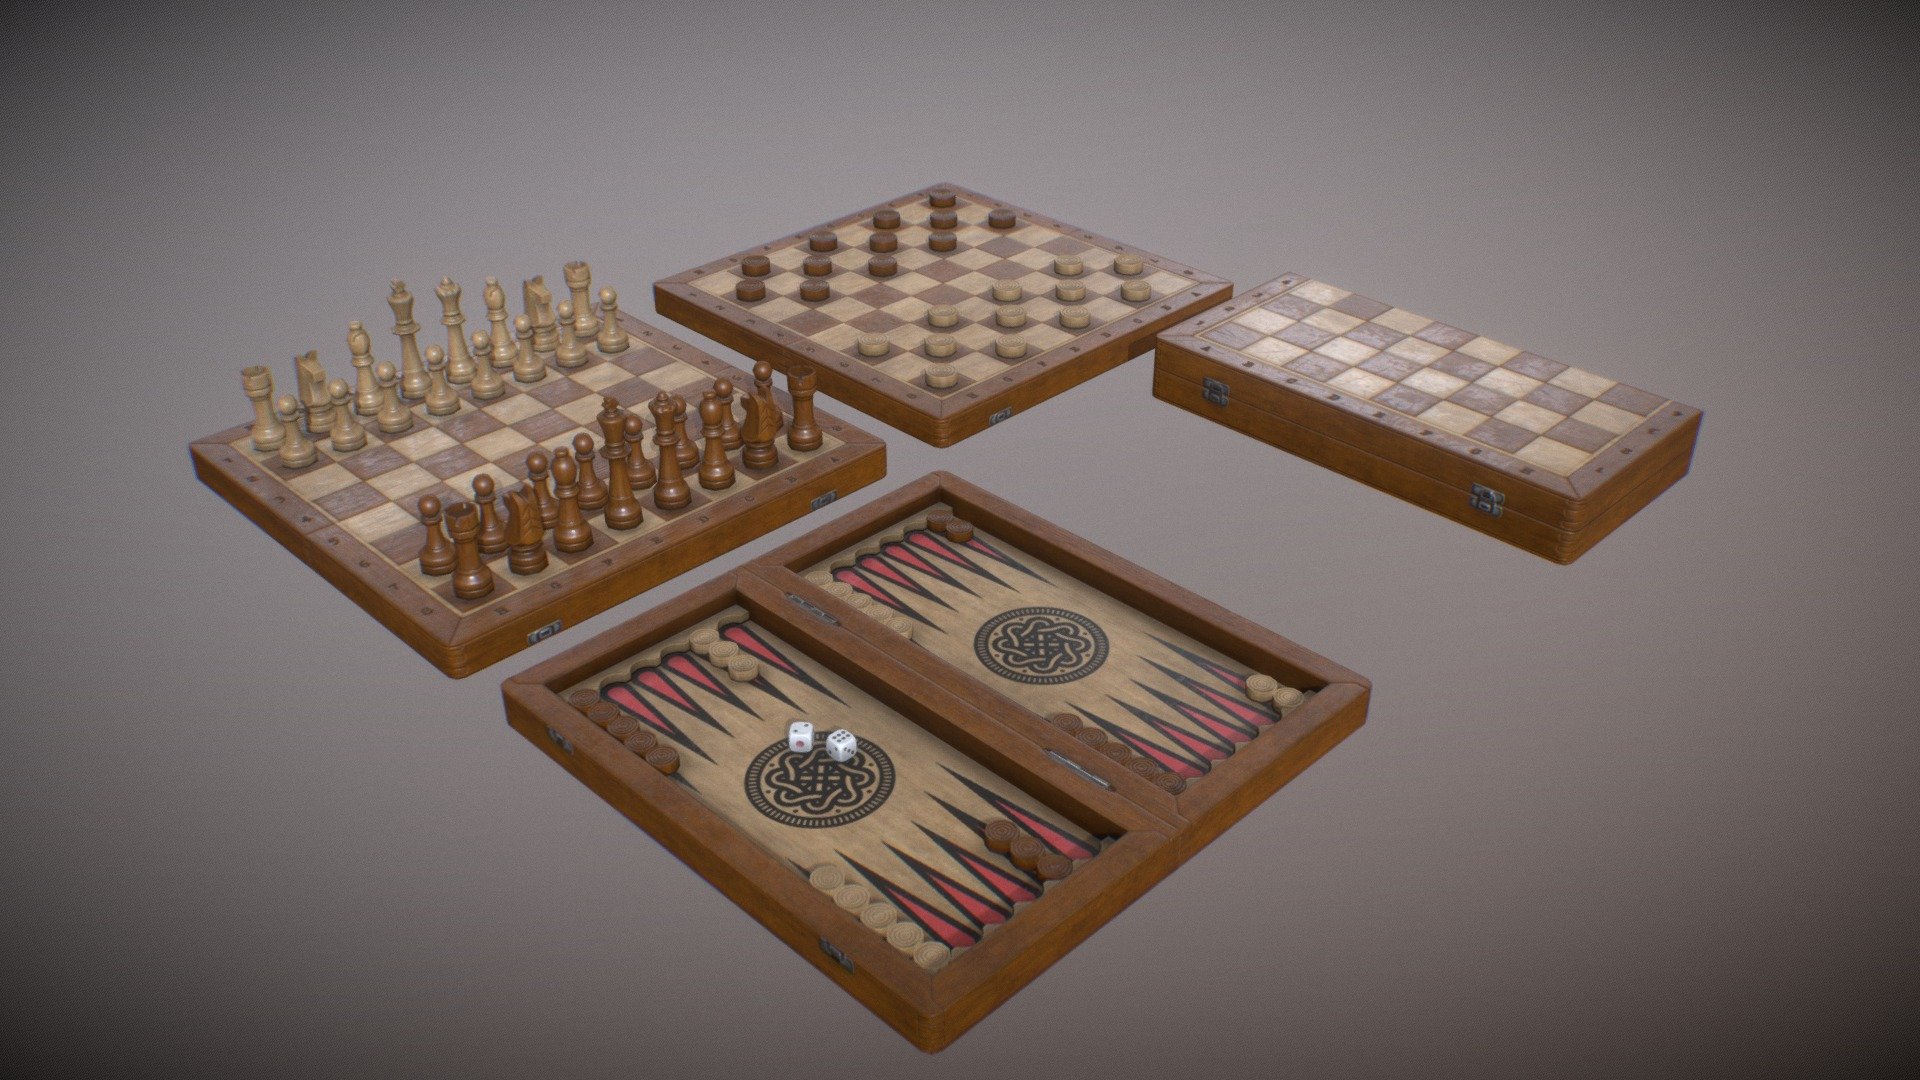 If you want add details to your game level or make scene where your npc's playing chess, backgammon or checkers, or if you want to create something like library or chess club level, this is what you need


Poly count: 

chess set: 7116 tris

backgammon set: 1548 tris

checkers set: 712 tris

folded chessboard: 28 tris


Textures: 
1 material, 5 textures (2048x2048):

- albedo

- ambient oclussion

- normal map

- metallic

- roughness
 - Chess & Backgammon & Checkers GameReady Props - 3D model by Constant33N 3d model